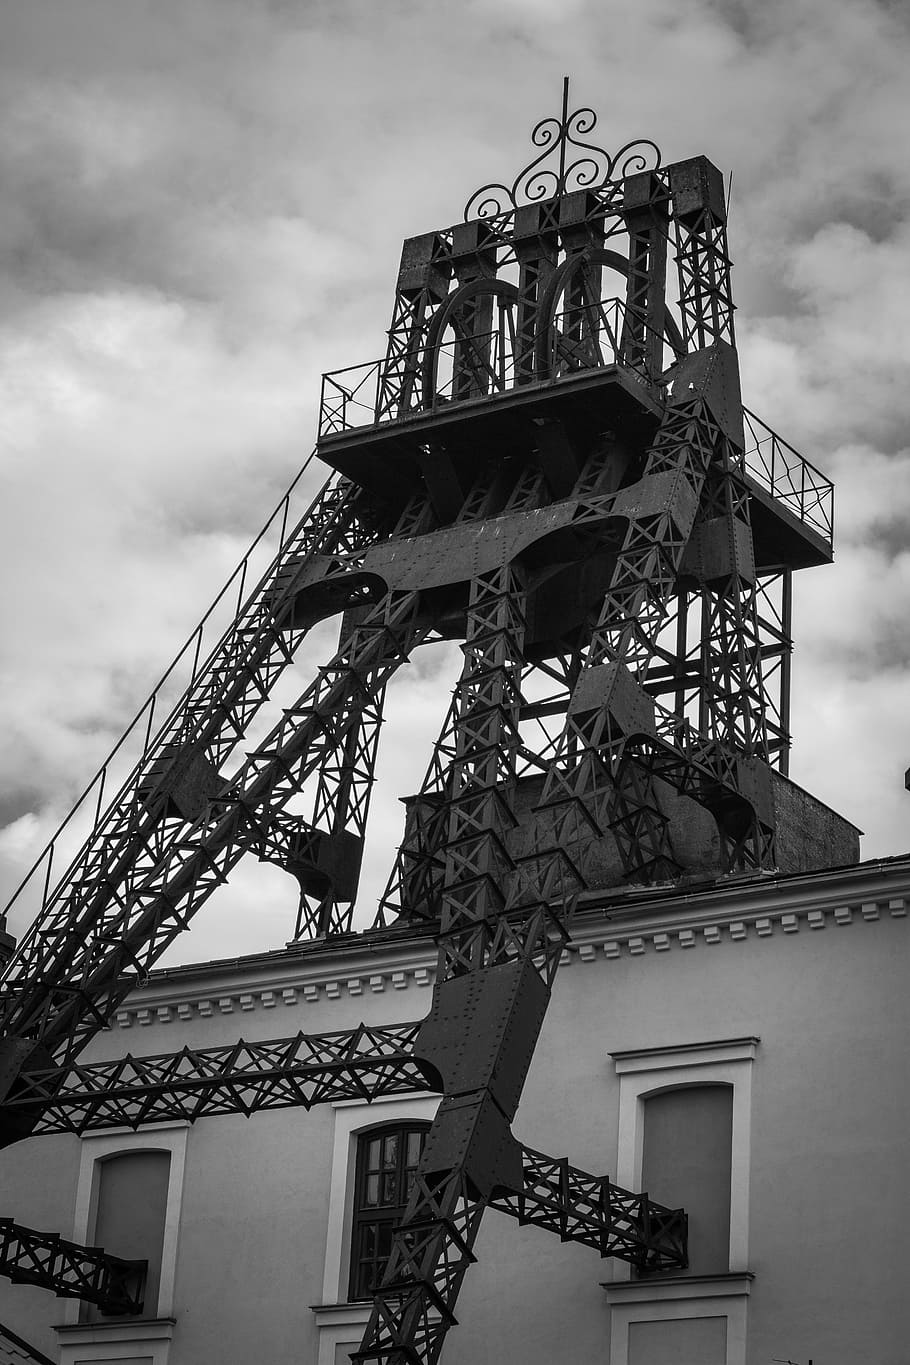 the jindřich mining tower, tower, extraction, coal, coal mining, atmosphere, architecture, building, place, monument